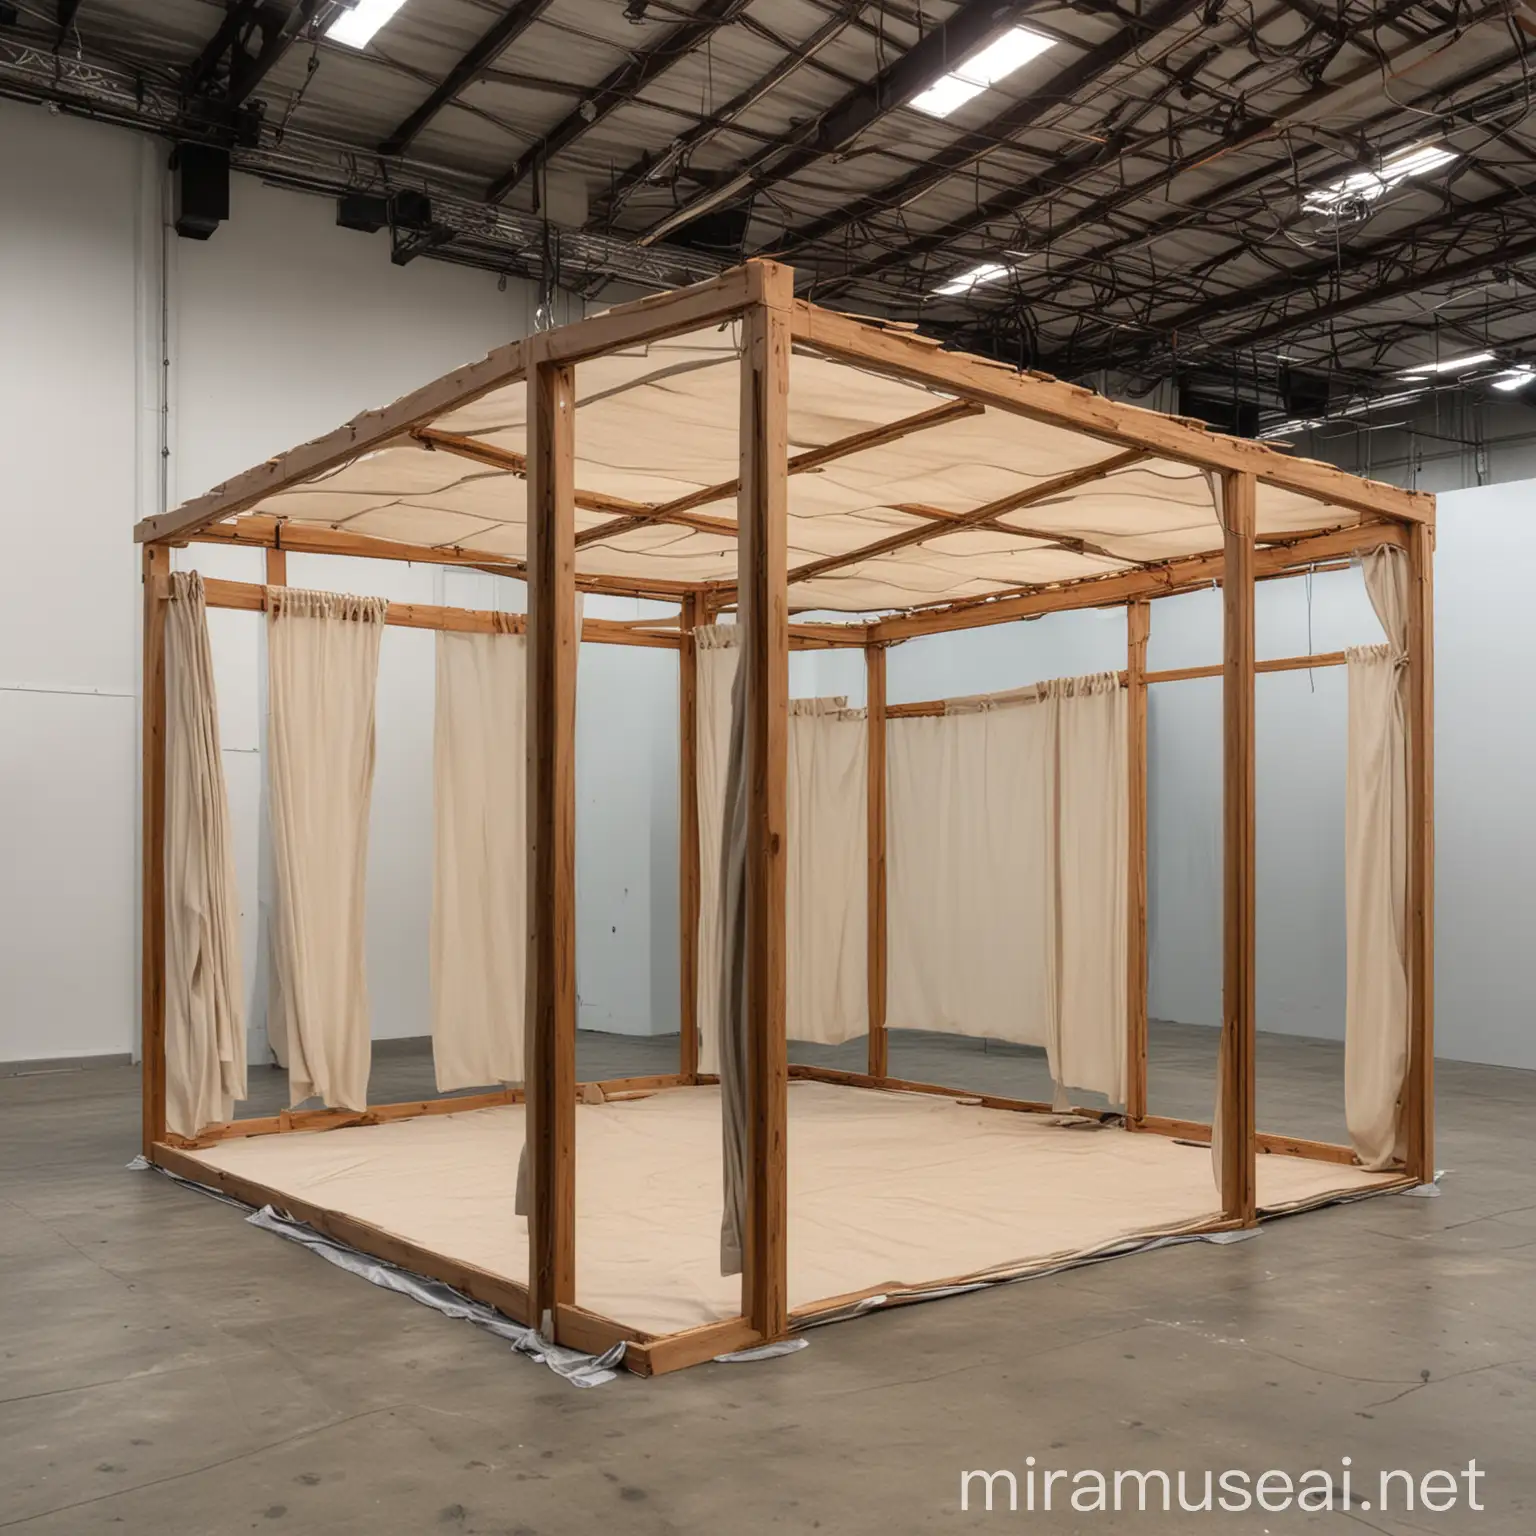 Modular Wood Frame Structure with Fabric Creative Architectural Design